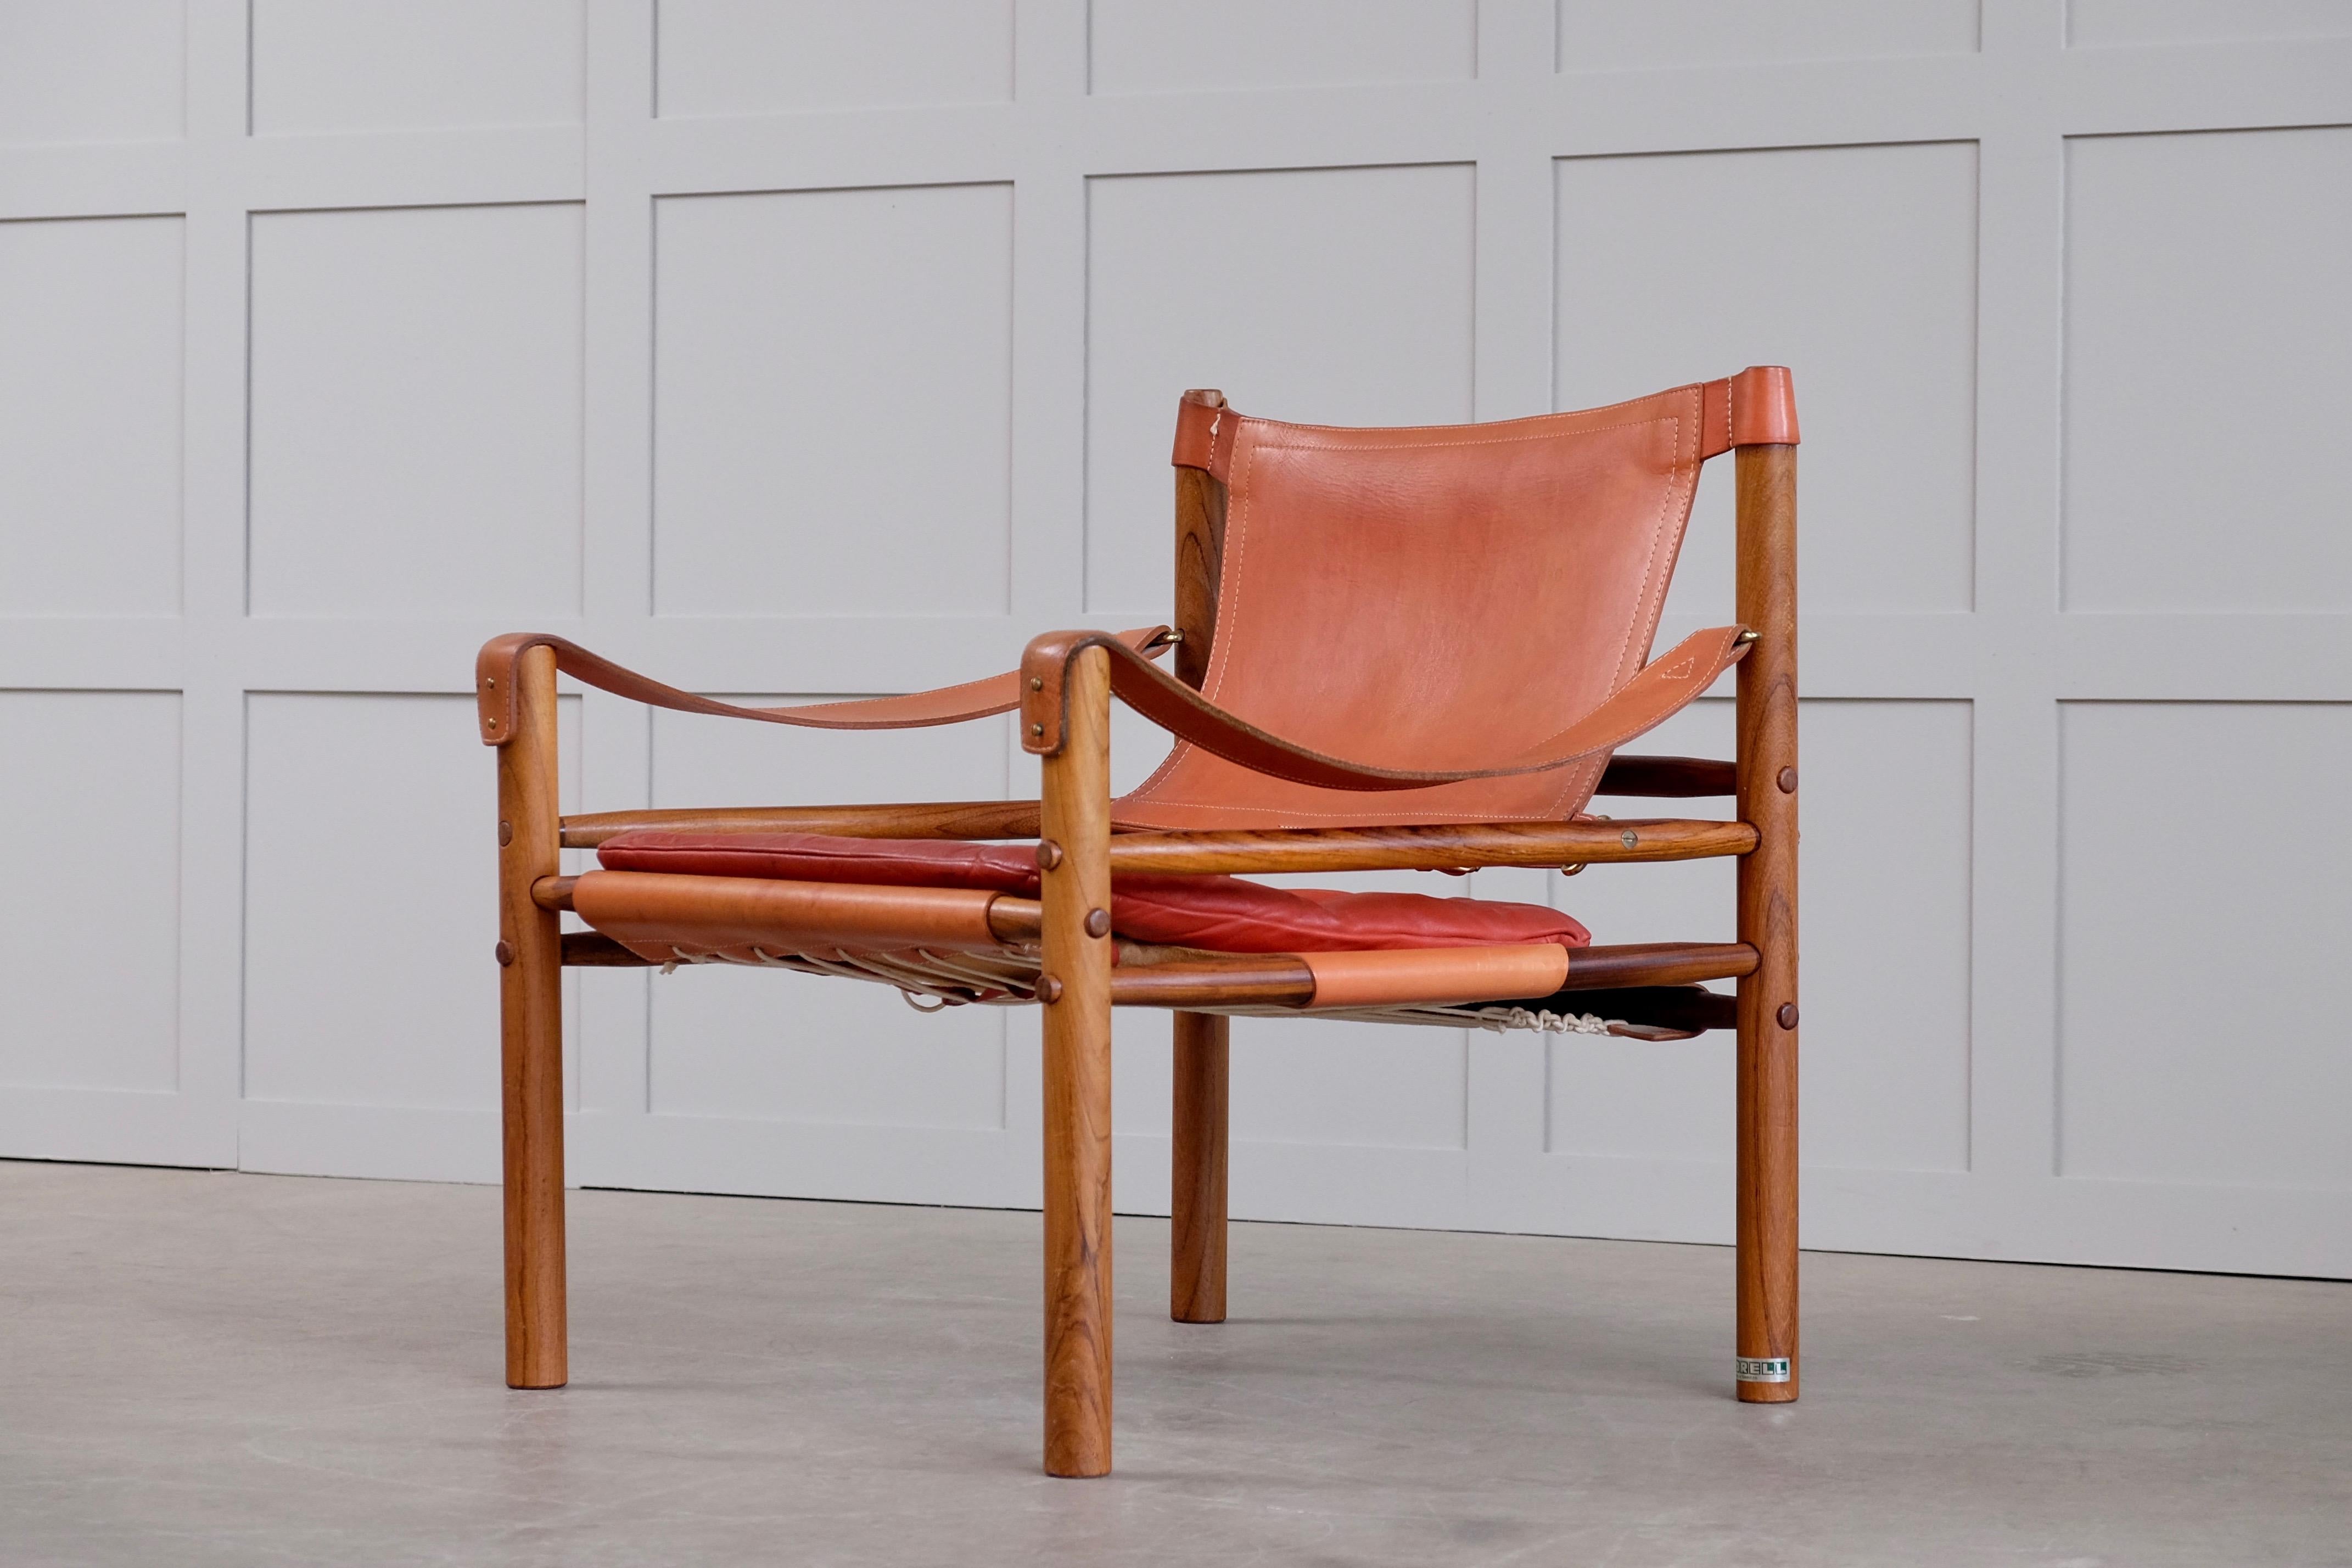 Lovely safari chair / easy chair in red/rusty brown leather and rosewood designed by Arne Norell, 1964. Produced by Arne Norell AB in Aneby, Sweden, 1960s.

   